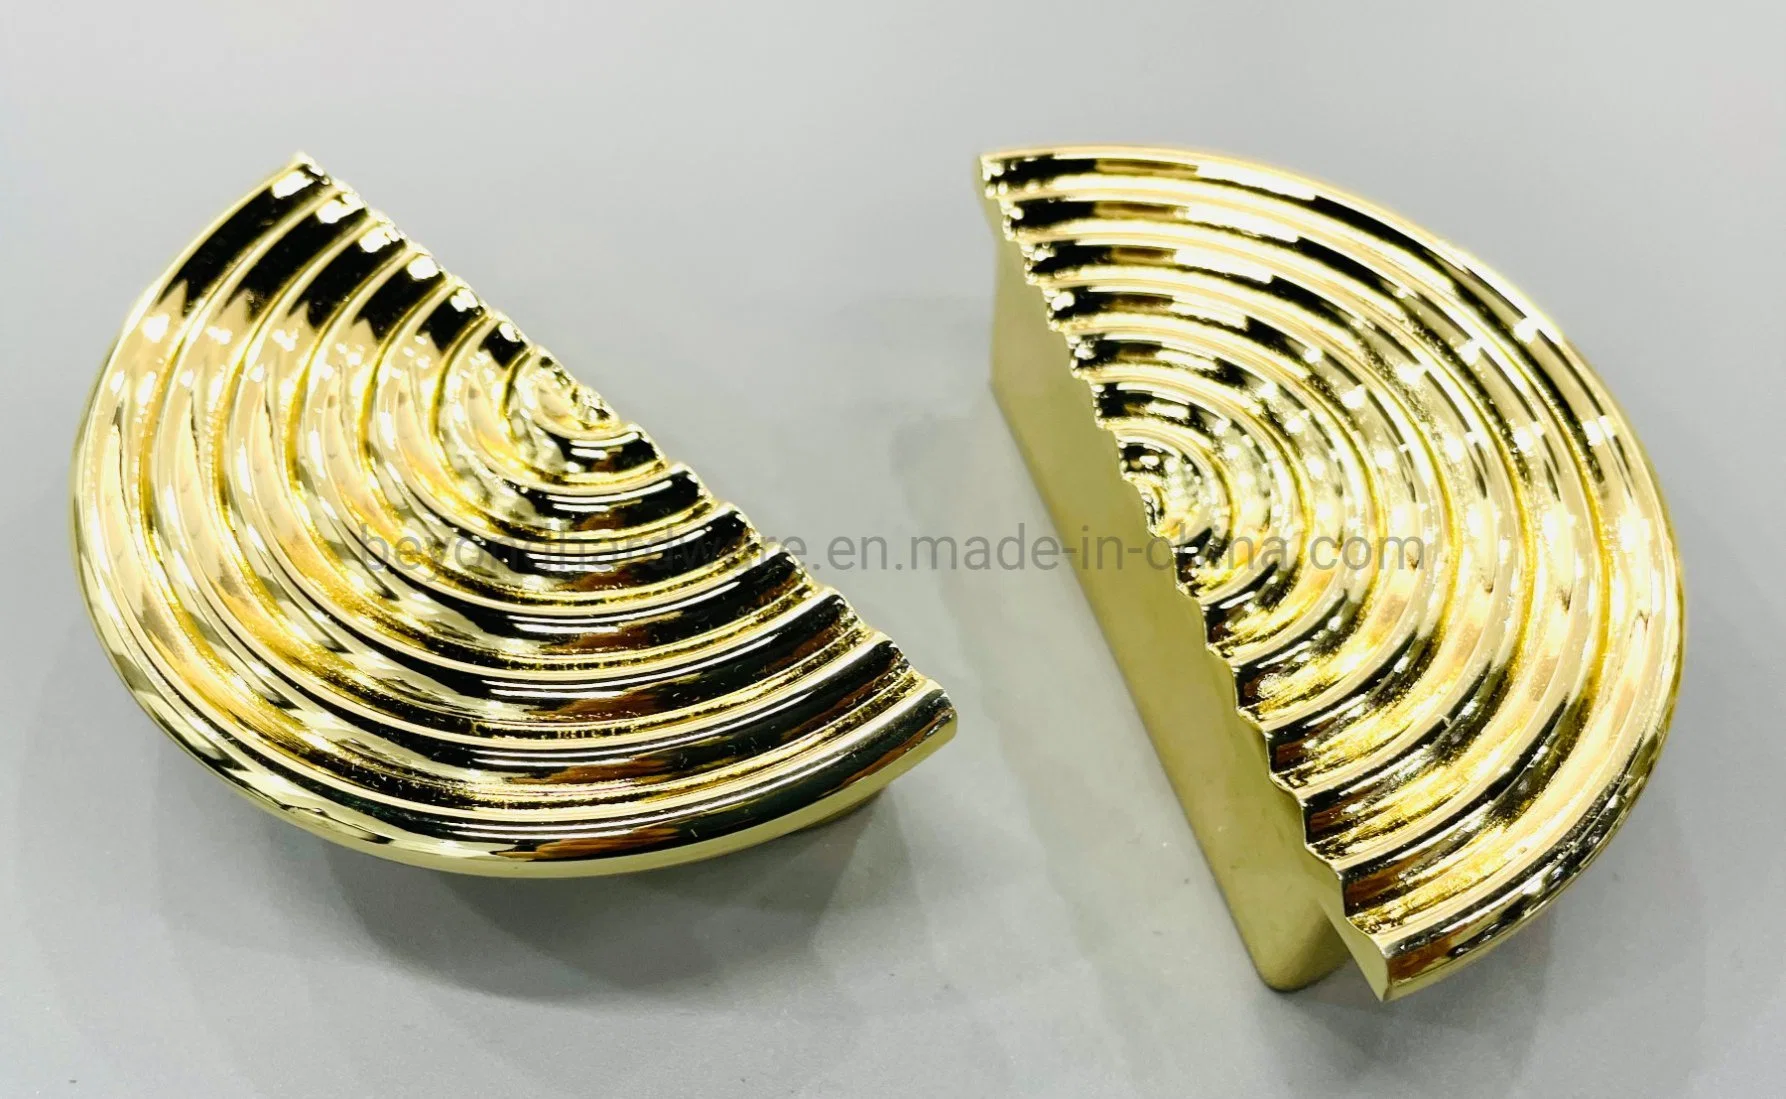 Half Moon Round Aluminum Drawer Pulls Curcle Cabinet Handles Gold Other Furniture Hardware for Bathroom